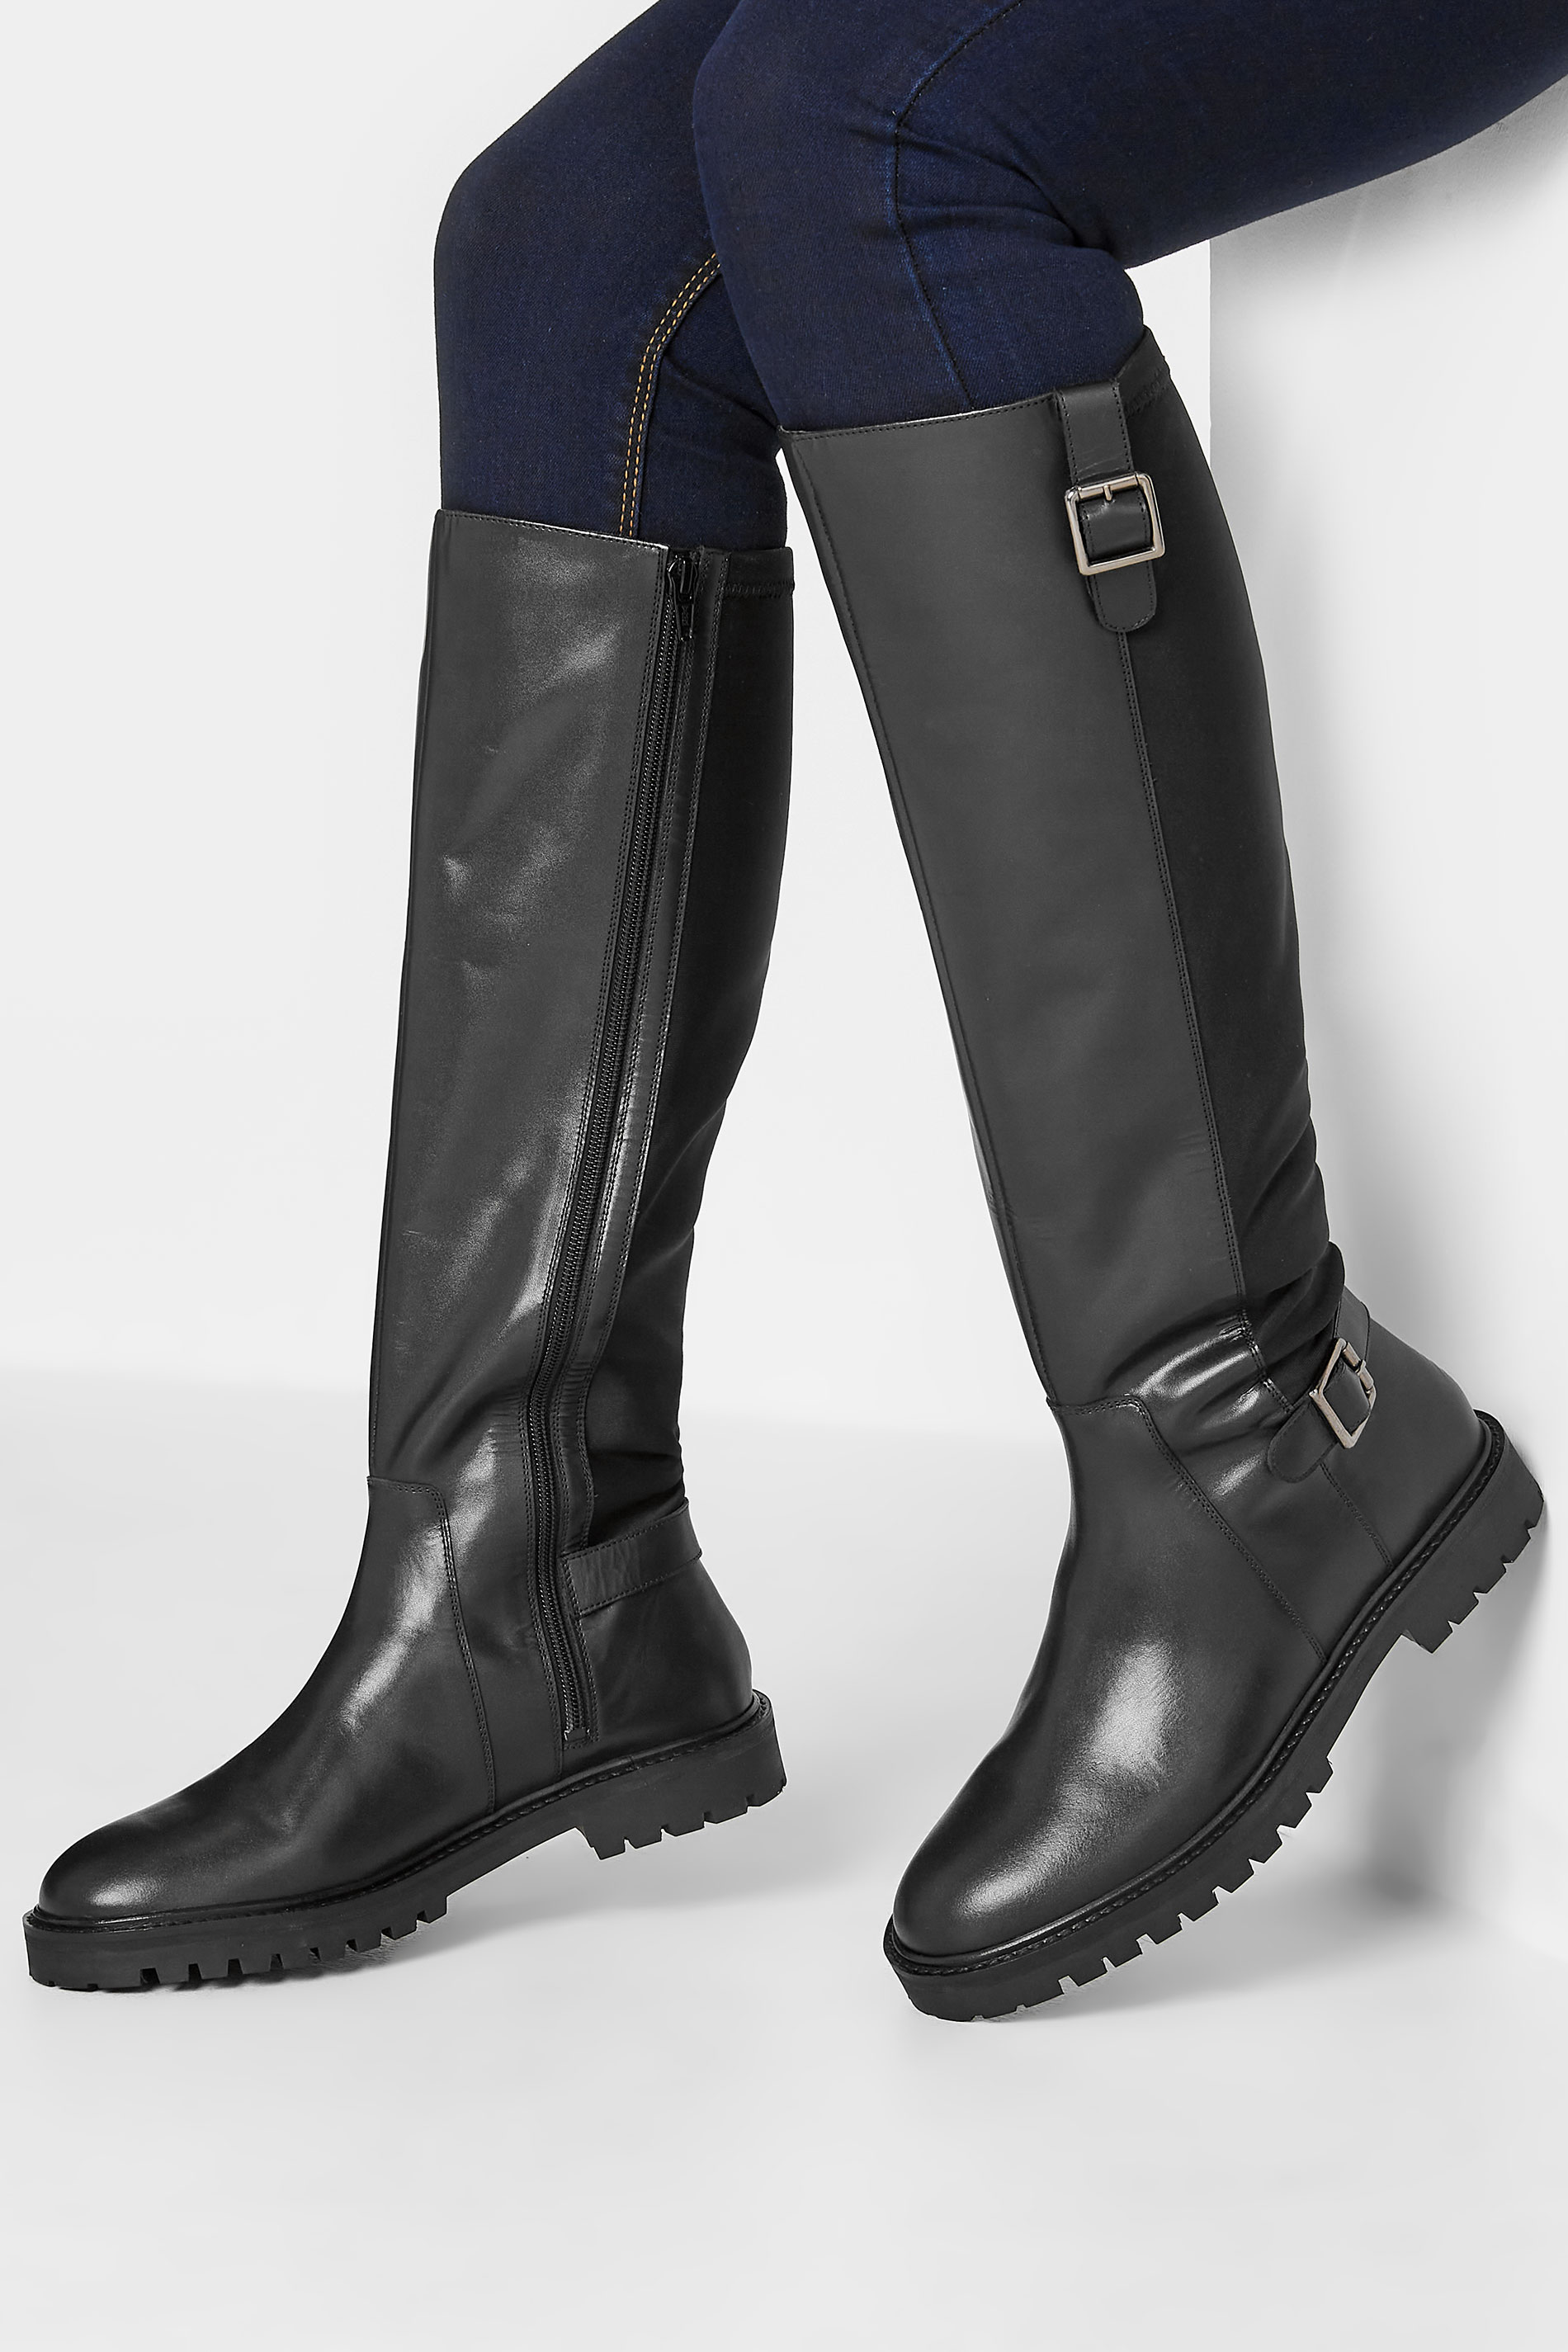 LTS Black Buckle Leather Knee High Boots In Standard D Fit | Long Tall Sally 1